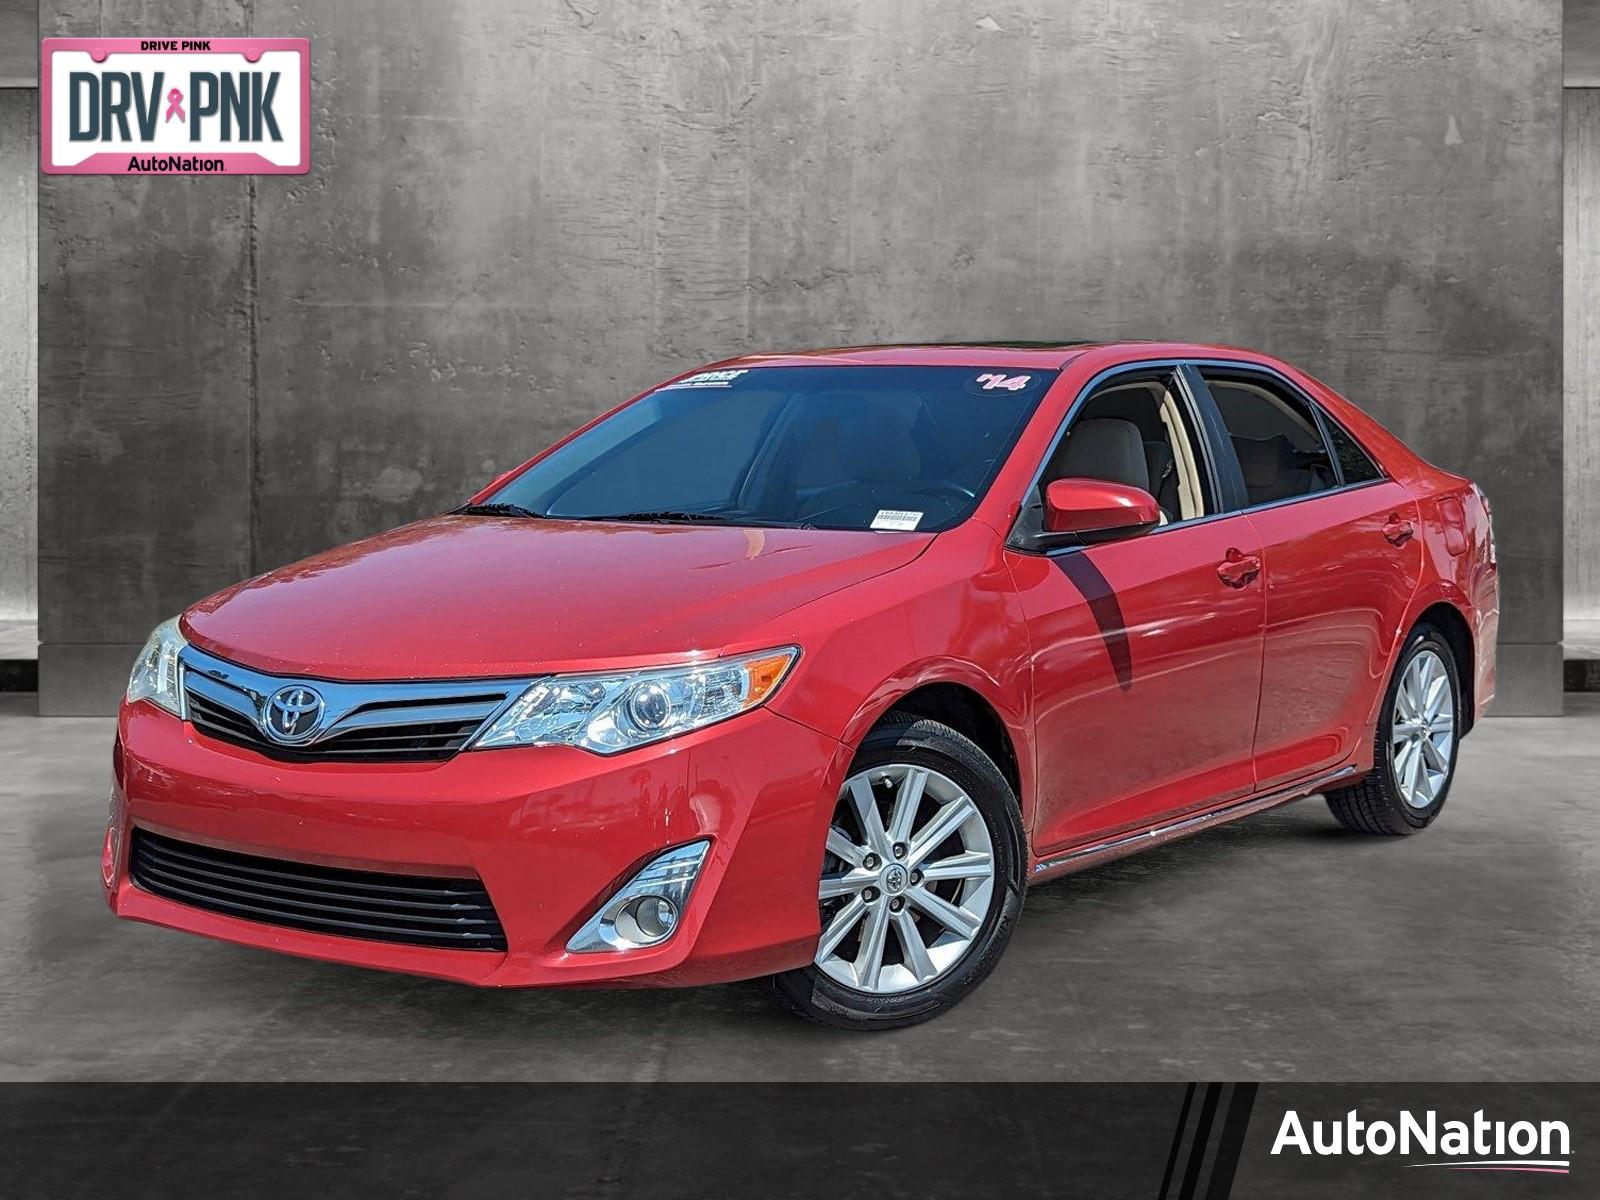 2014 Toyota Camry Vehicle Photo in Tampa, FL 33614